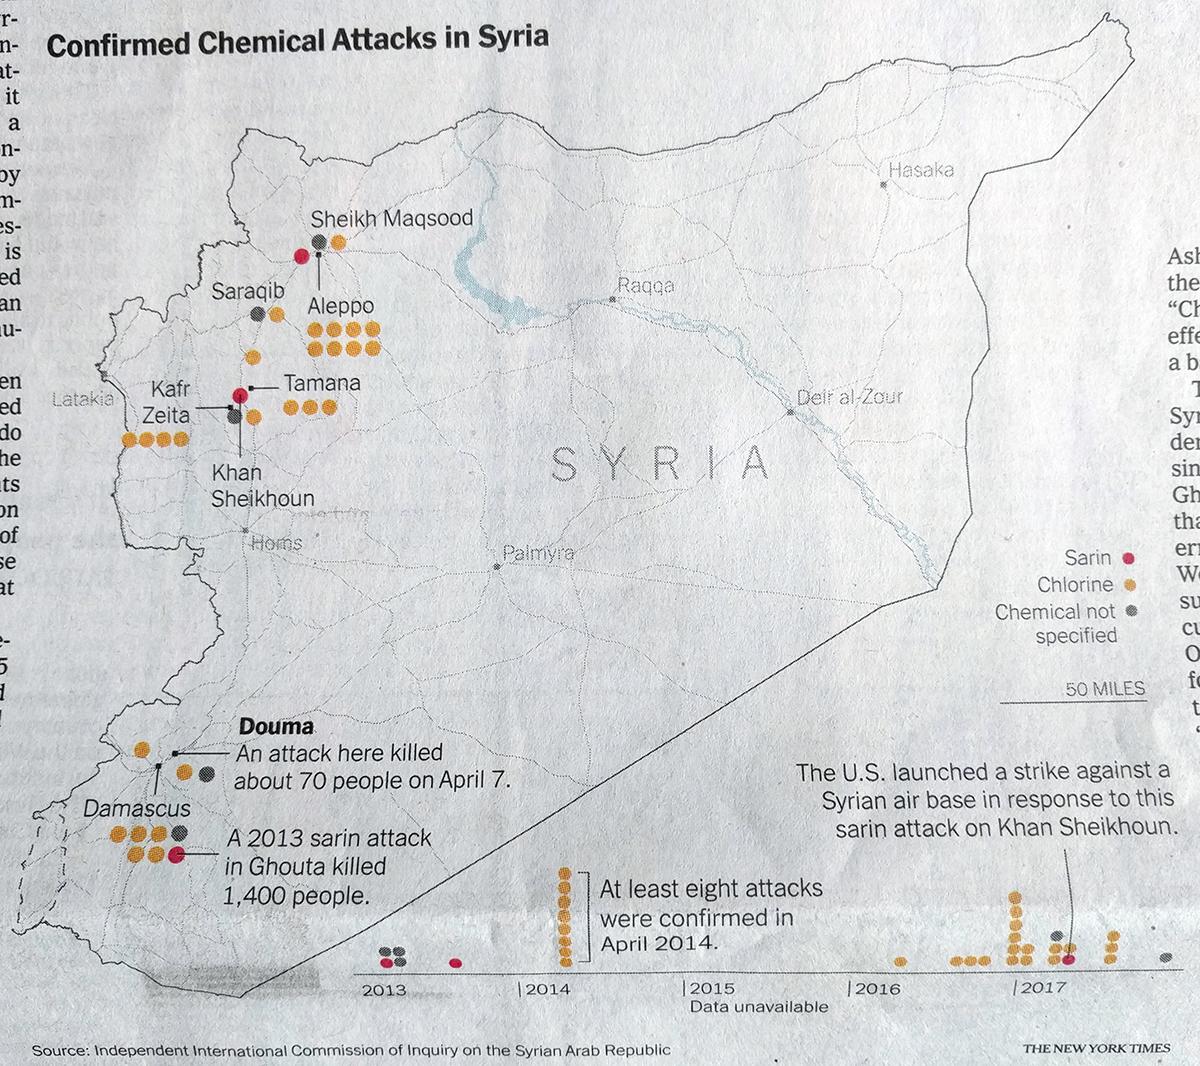 Note the timeline in the lower-right to provide context of when and how frequent the chemical attacks have been